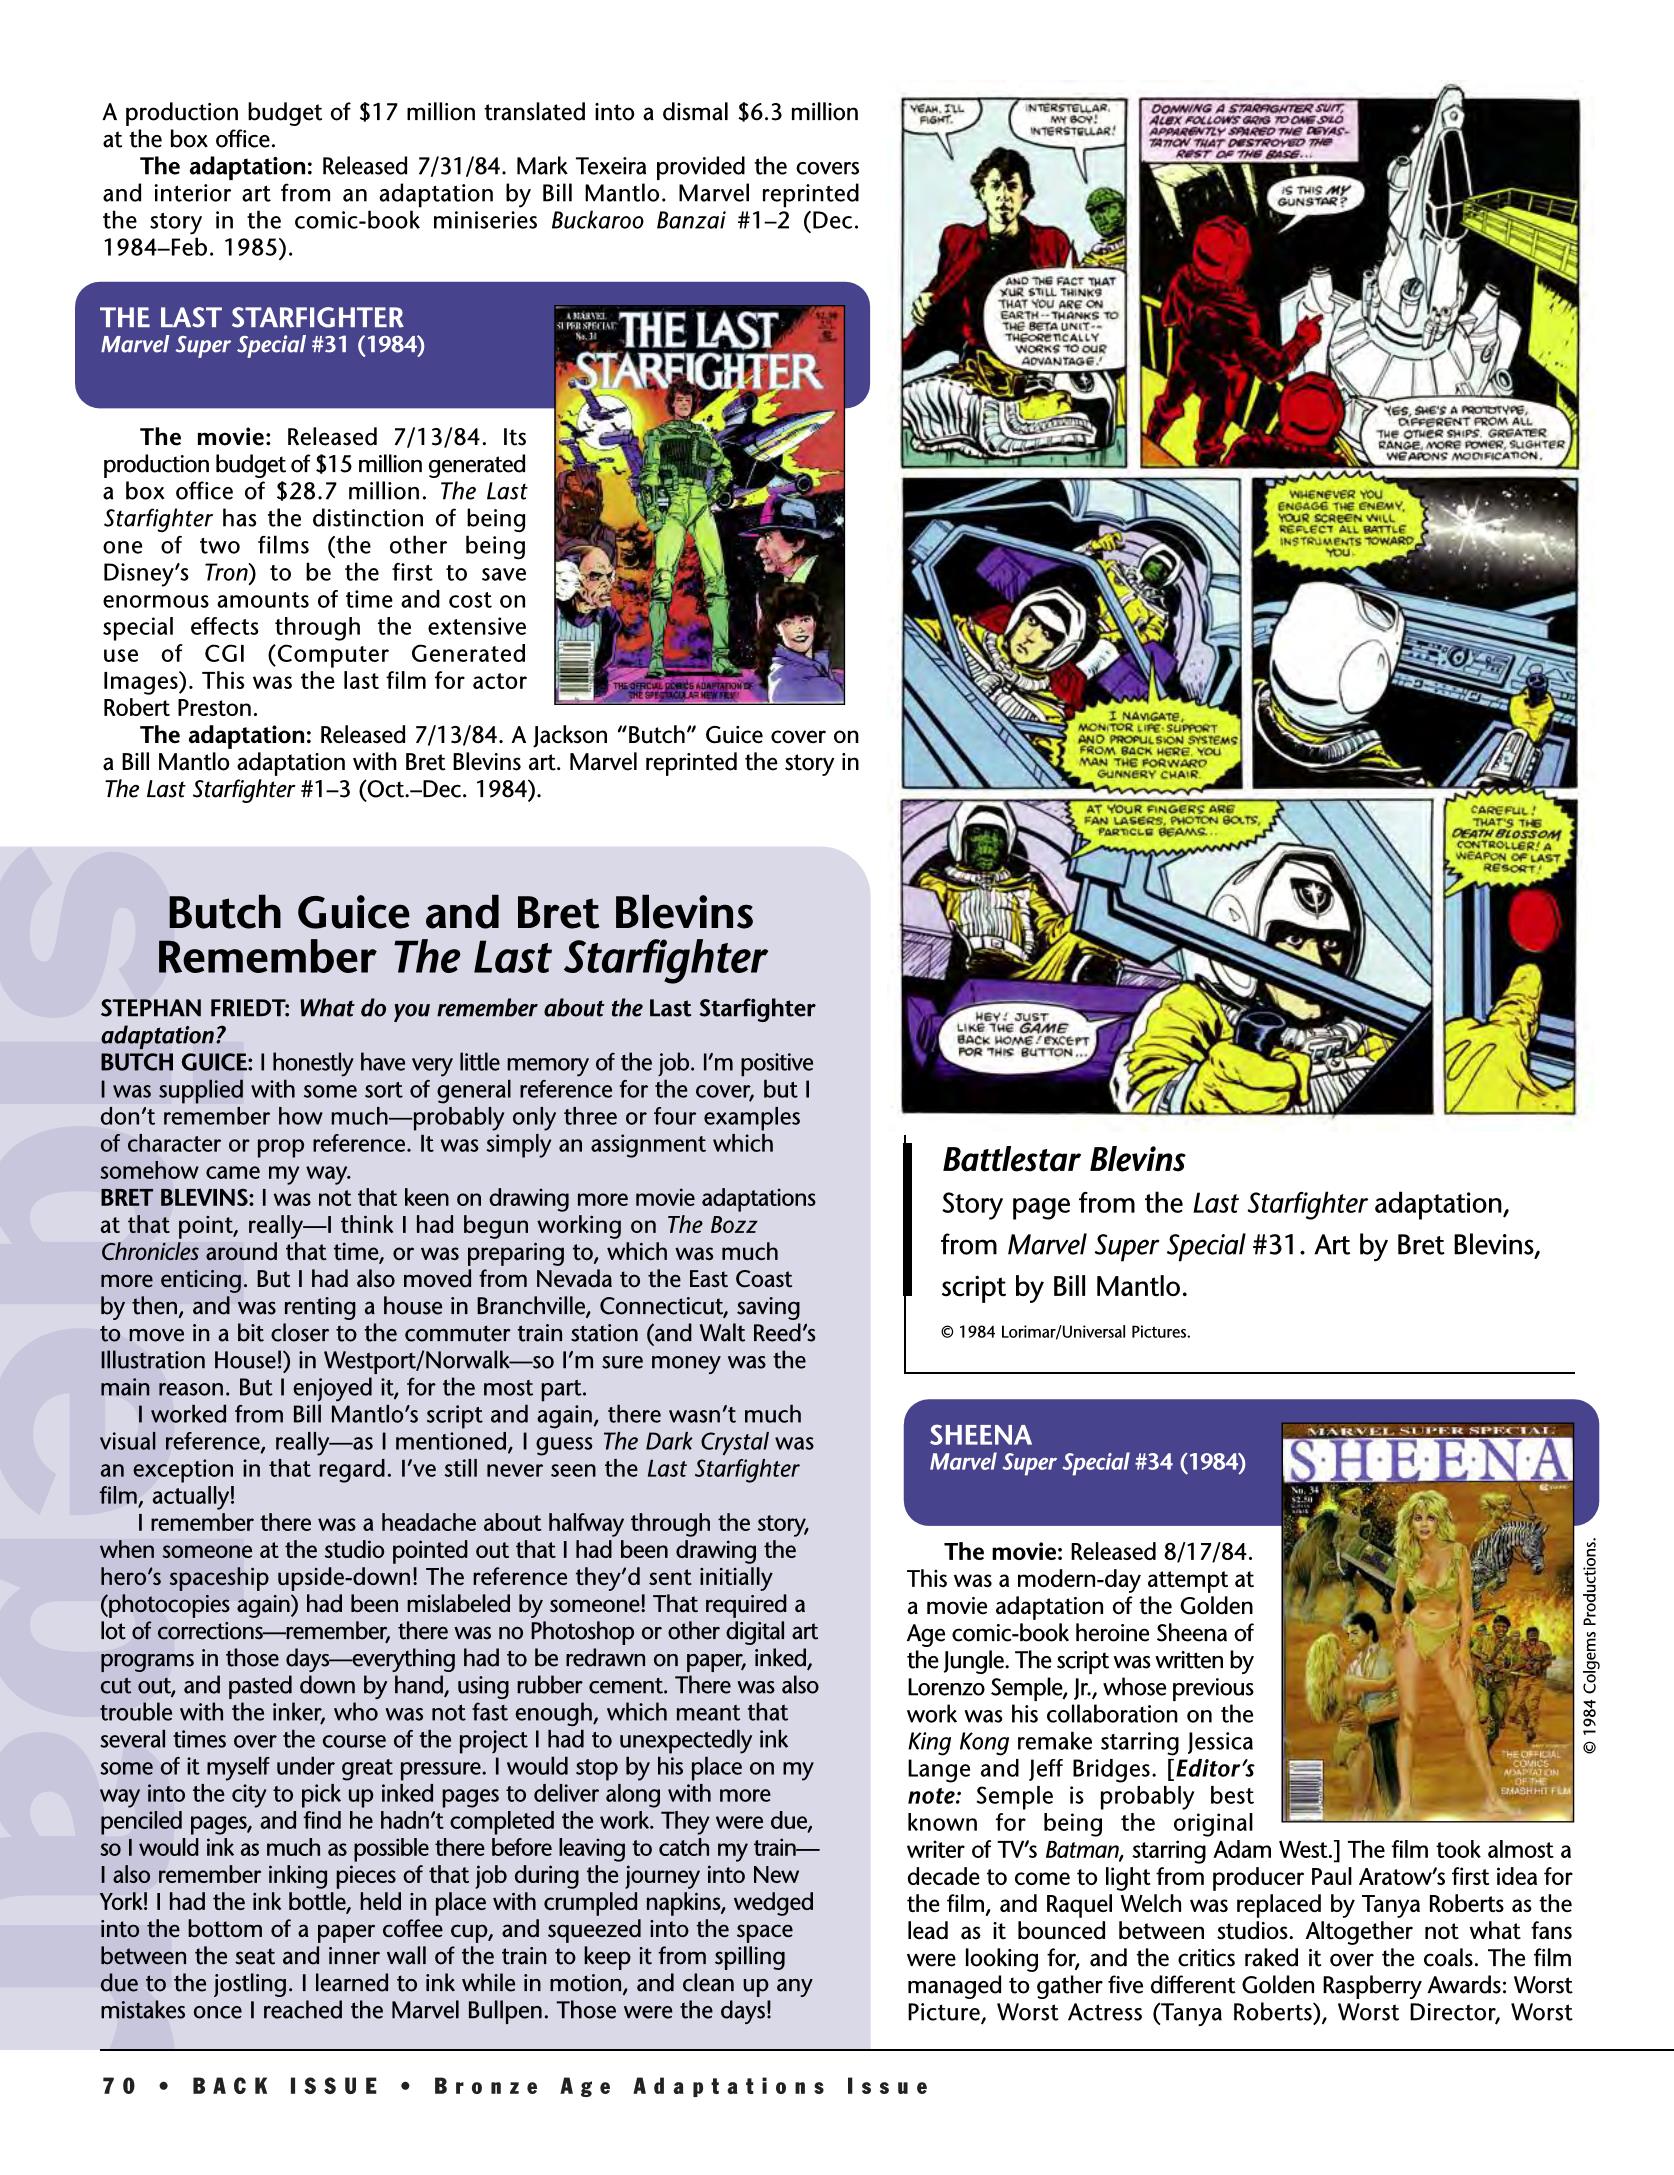 Read online Back Issue comic -  Issue #89 - 70